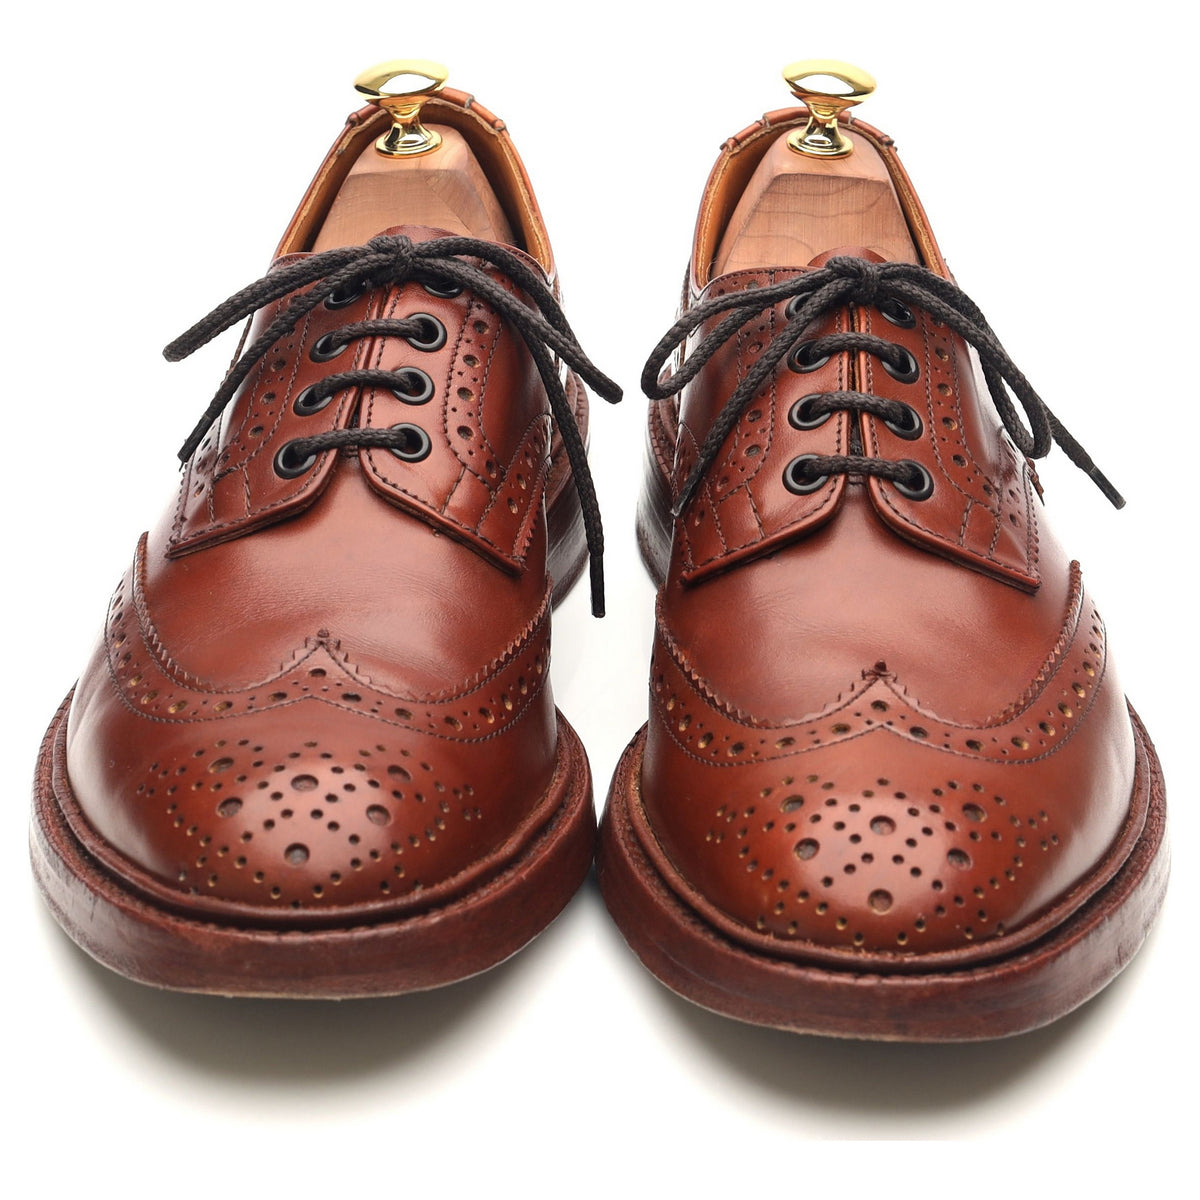 Bourton' Tan Brown Leather Country Derby Brogues UK 9 - Abbot's Shoes